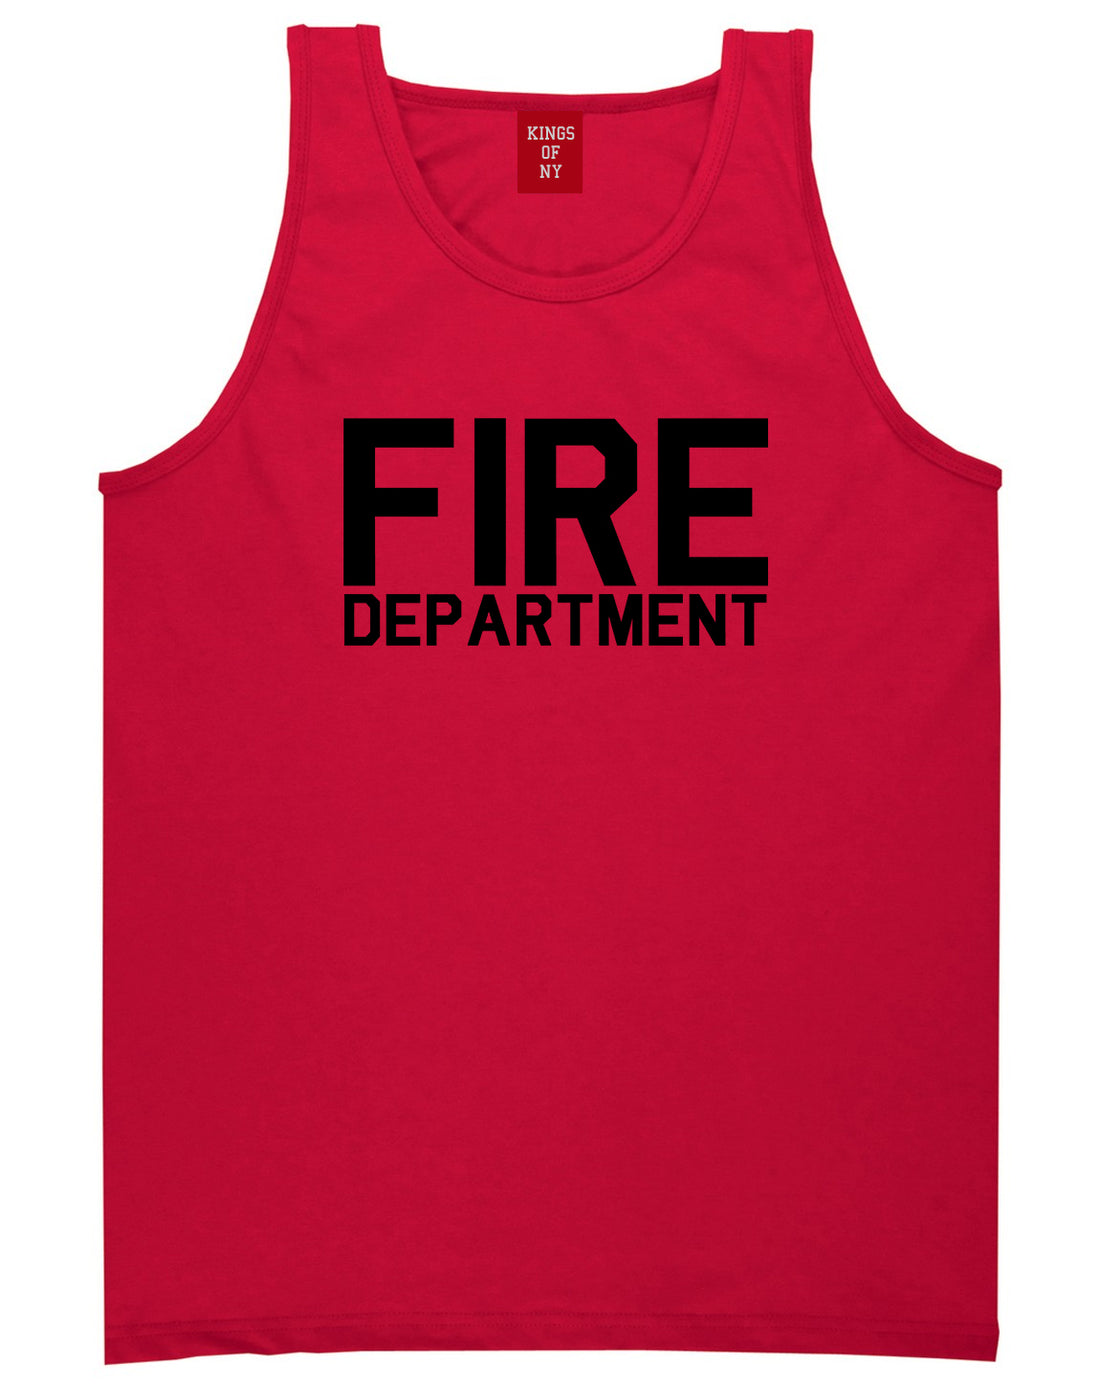 Fire Department Dept Mens Red Tank Top Shirt by KINGS OF NY